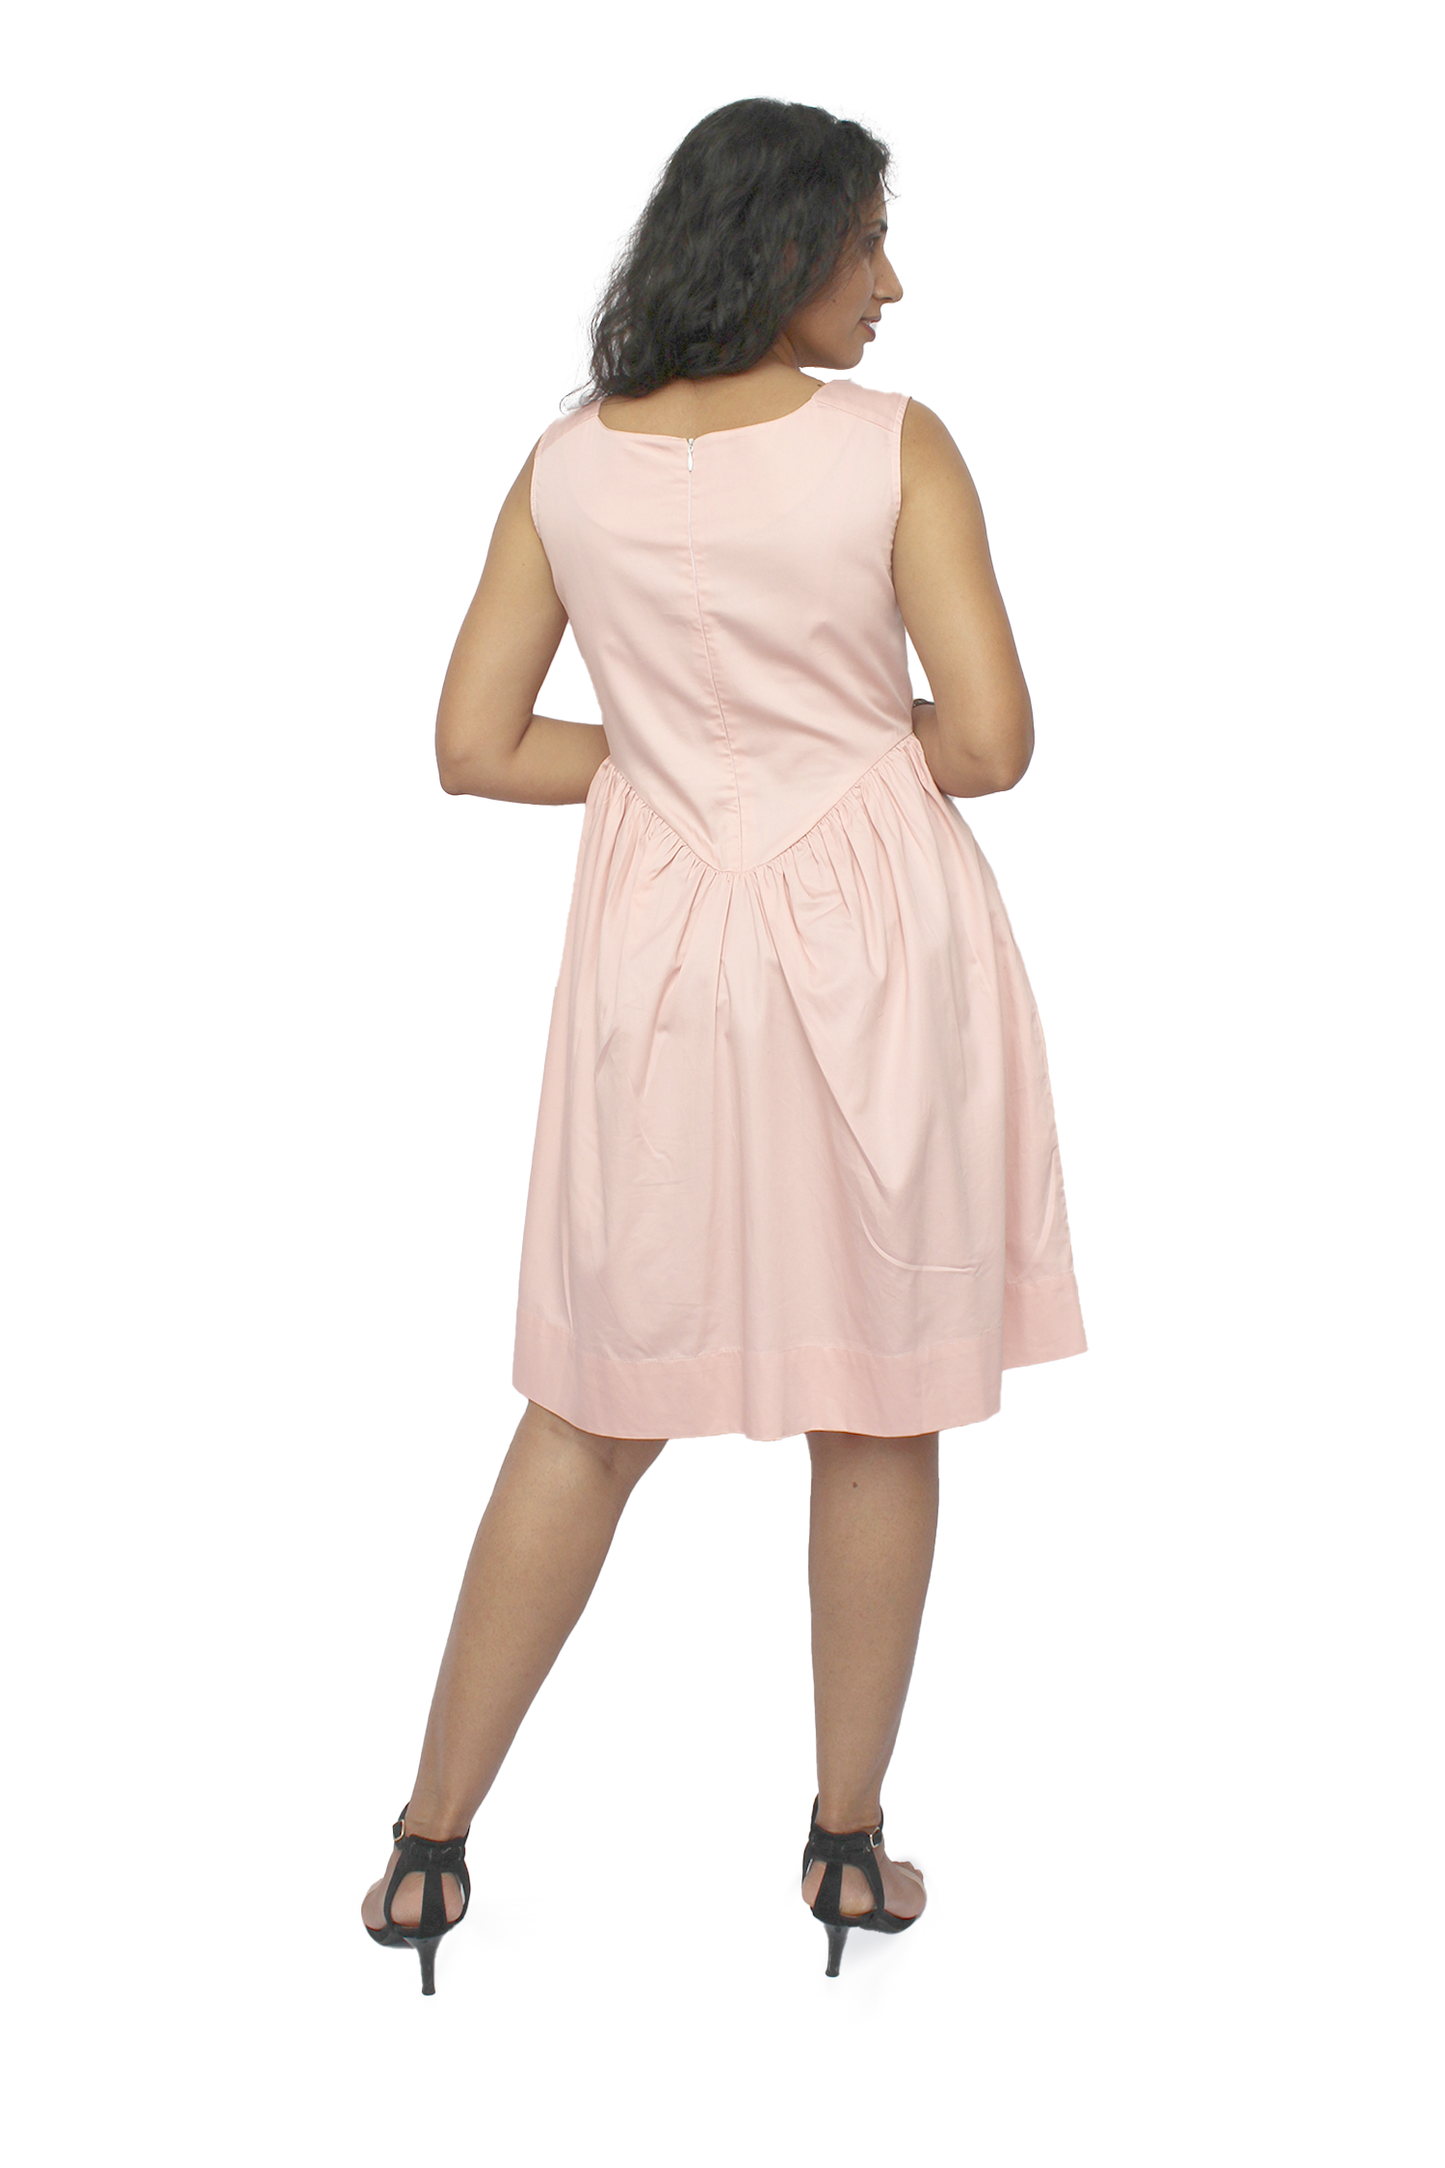 Wide Round Neck Sleeveless Fit and Flare Pink Cotton Satin Dress with Pockets